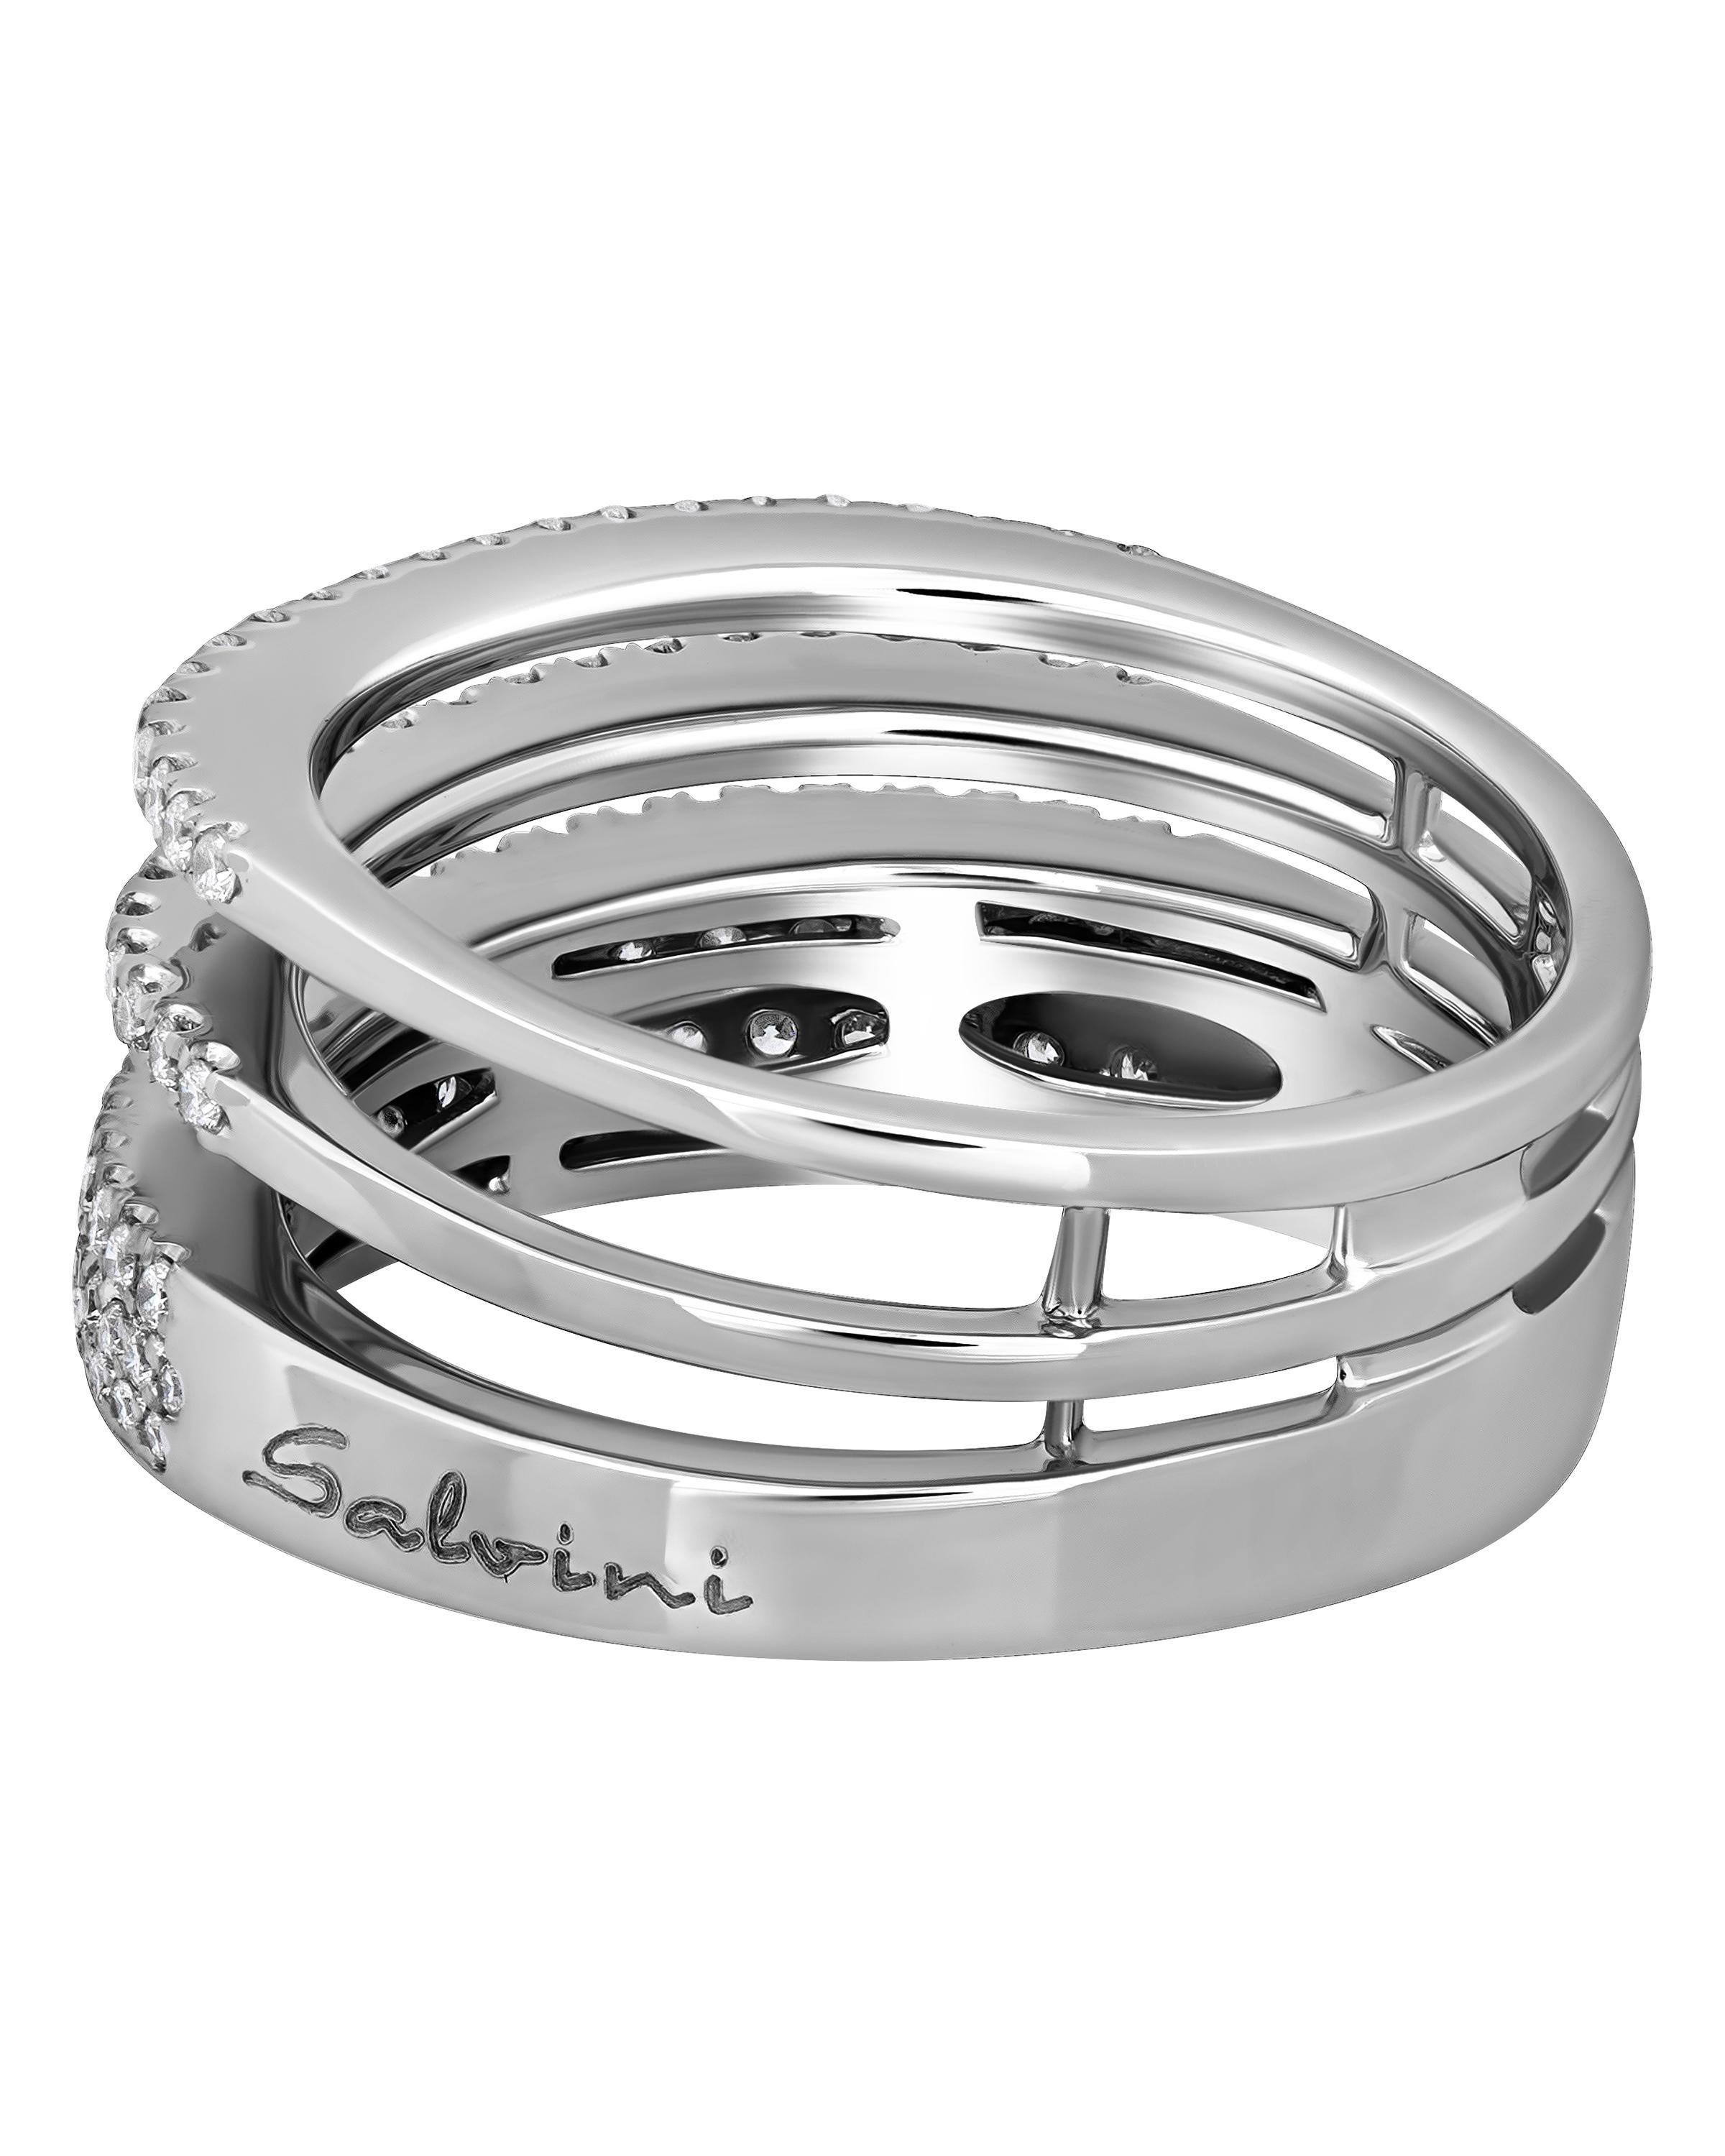 Salvini 18K white gold puzzle ring features three bands adorned with diamonds 0.55ct. tw. The ring size is 7.75. The band width is 7.1mm. The weight is 8g. This designer jewelry is shipped with a Salvini Box.
